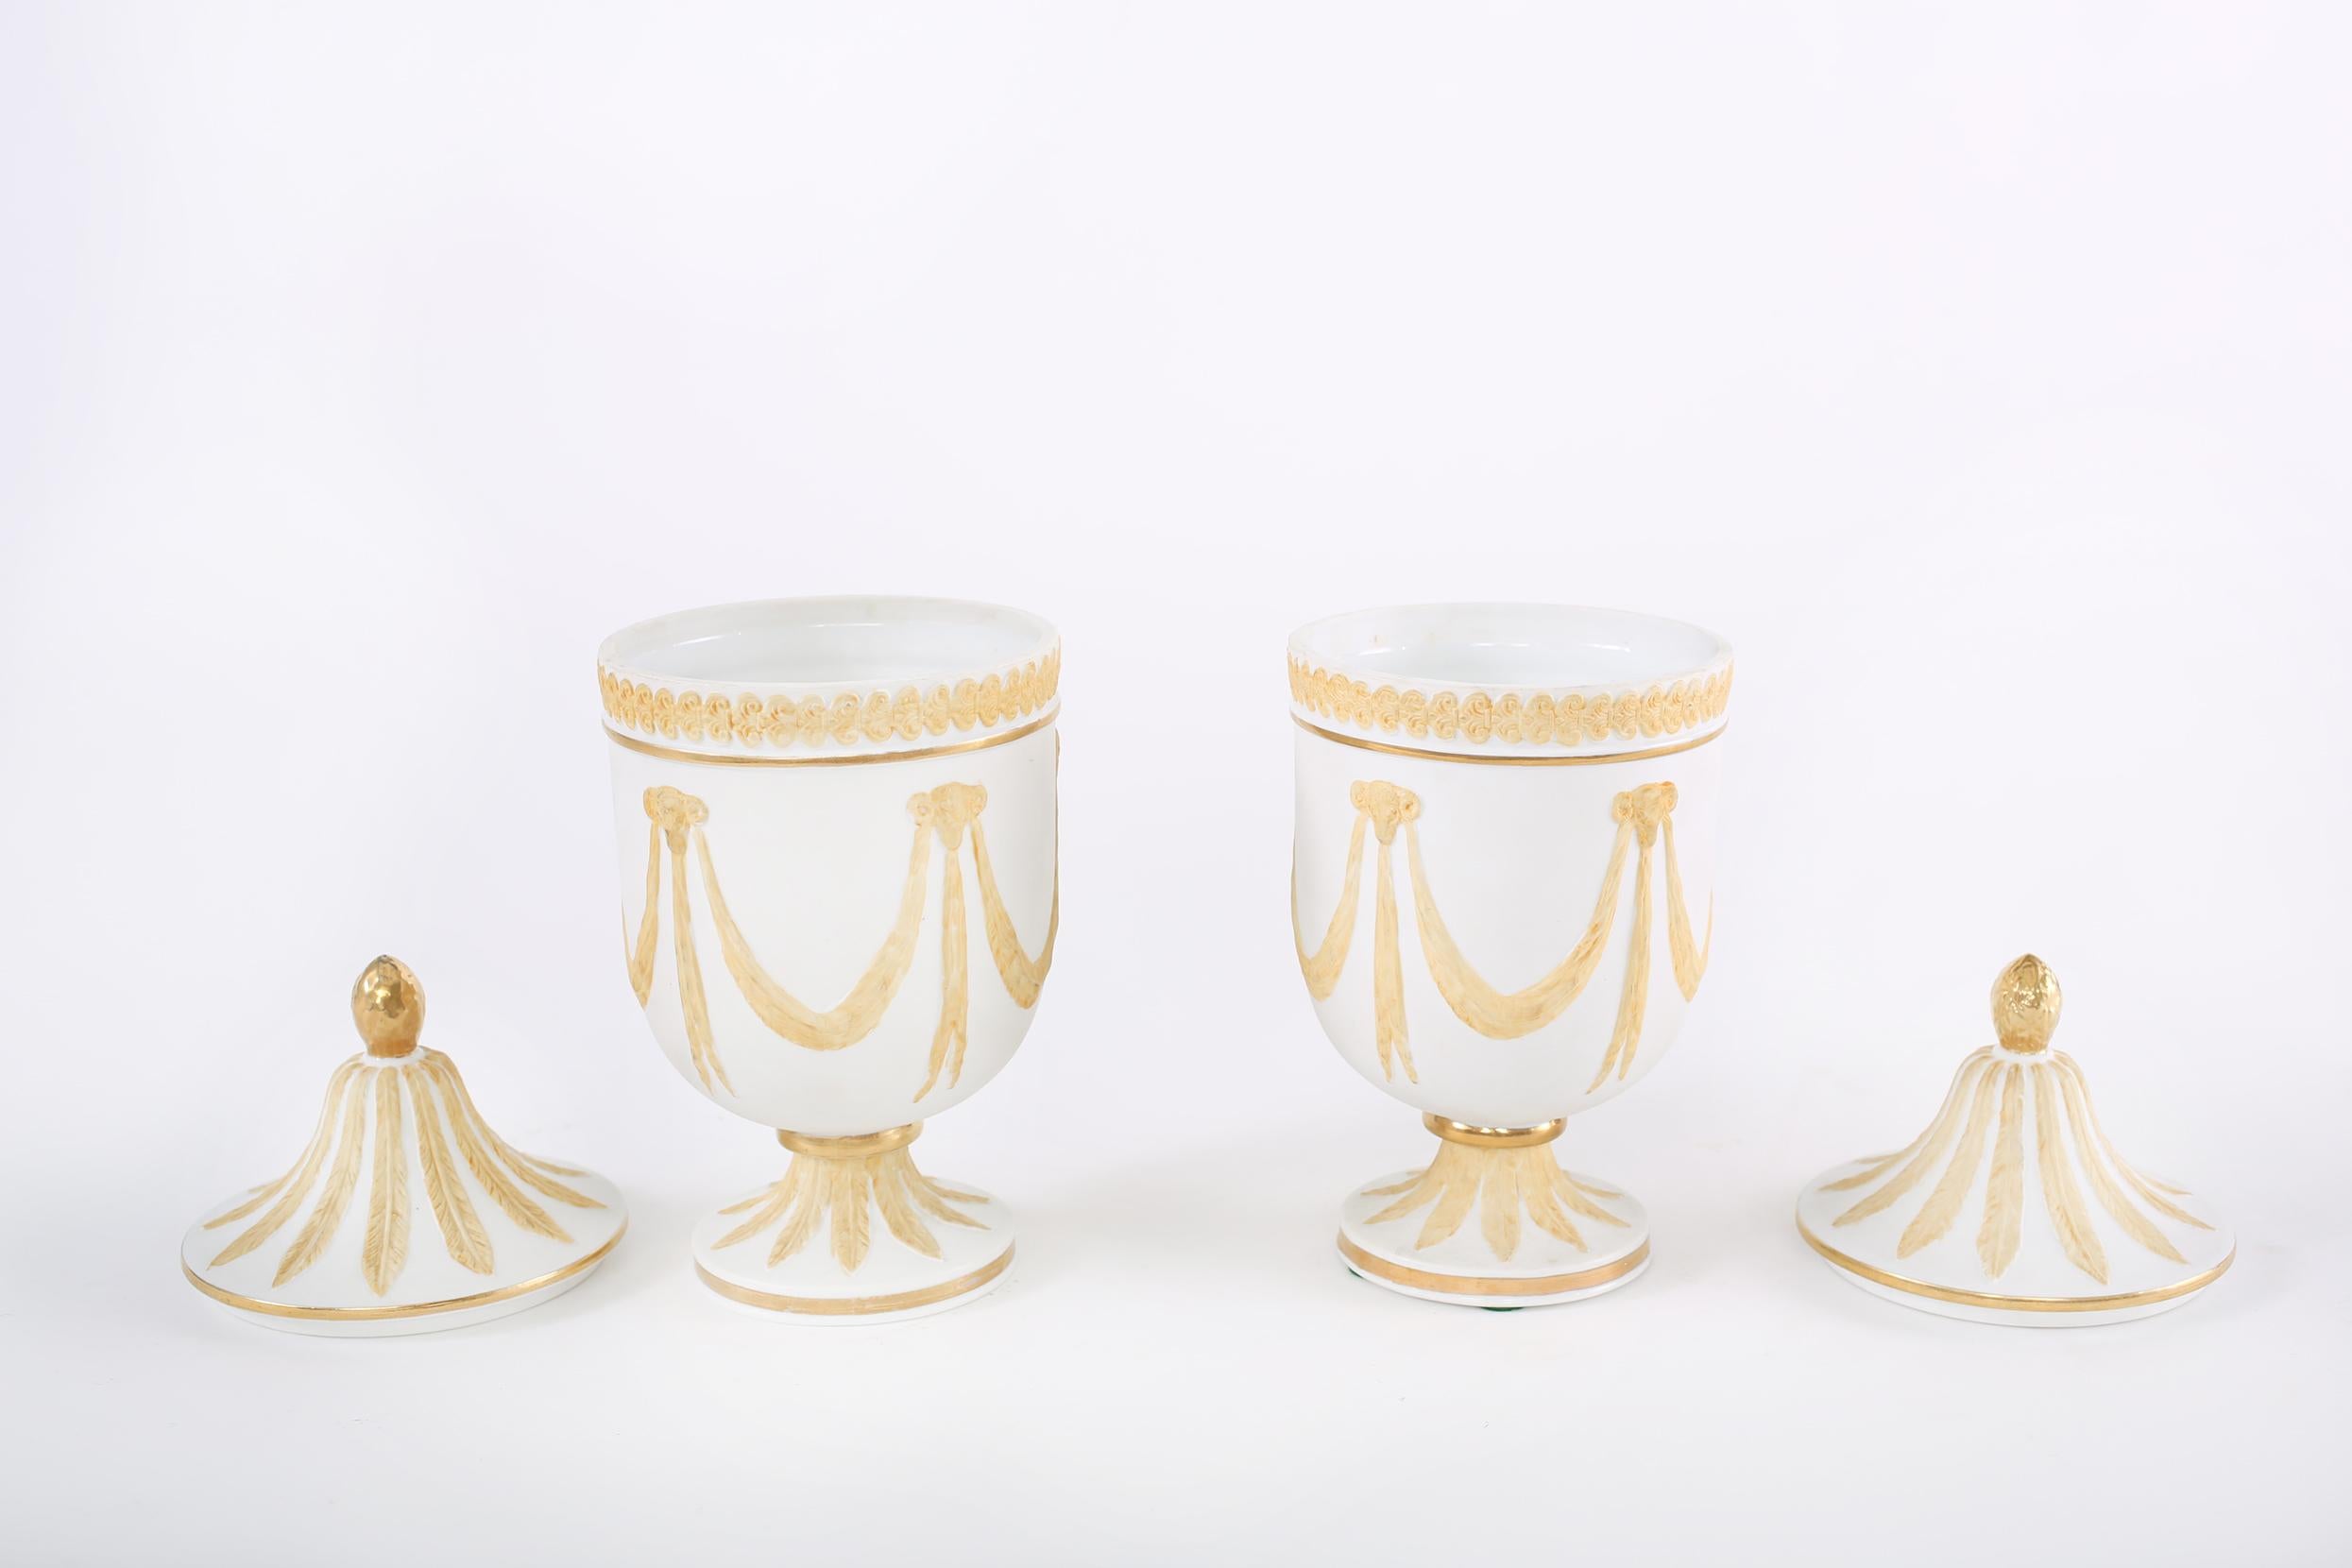 Pair of gilt porcelain decorative covered urns with exterior design details. Each urn is in great condition with minor wear consistent with age / use. Each stands about 10 inches tall x 5 inches diameter.